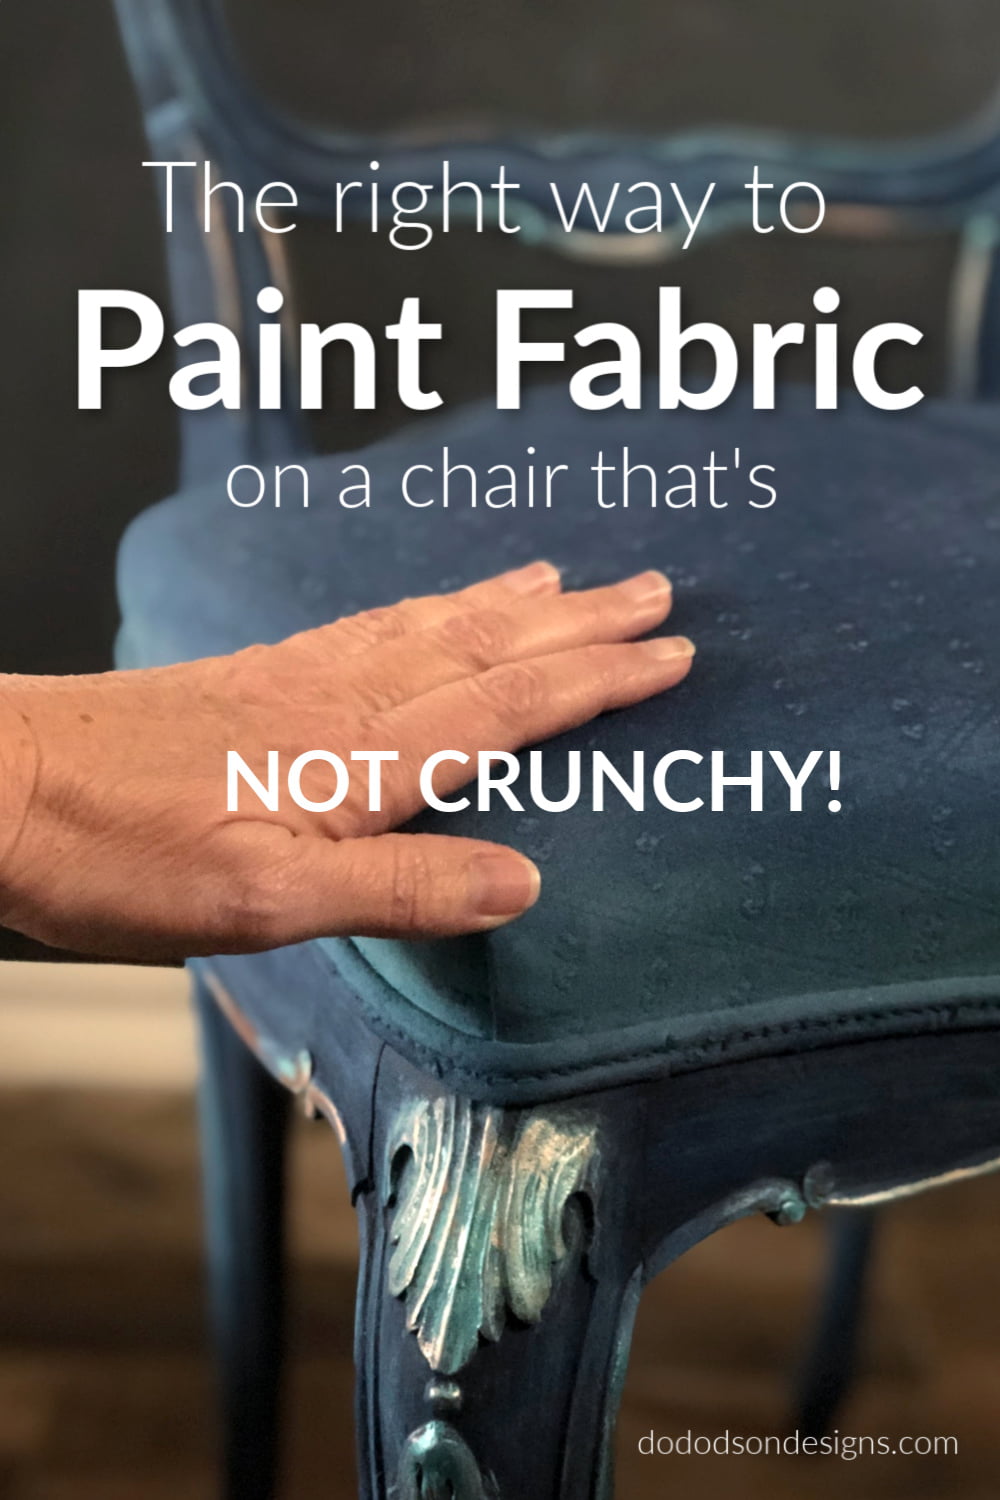 Painting Fabric on a Chair is Easier Than You Think!